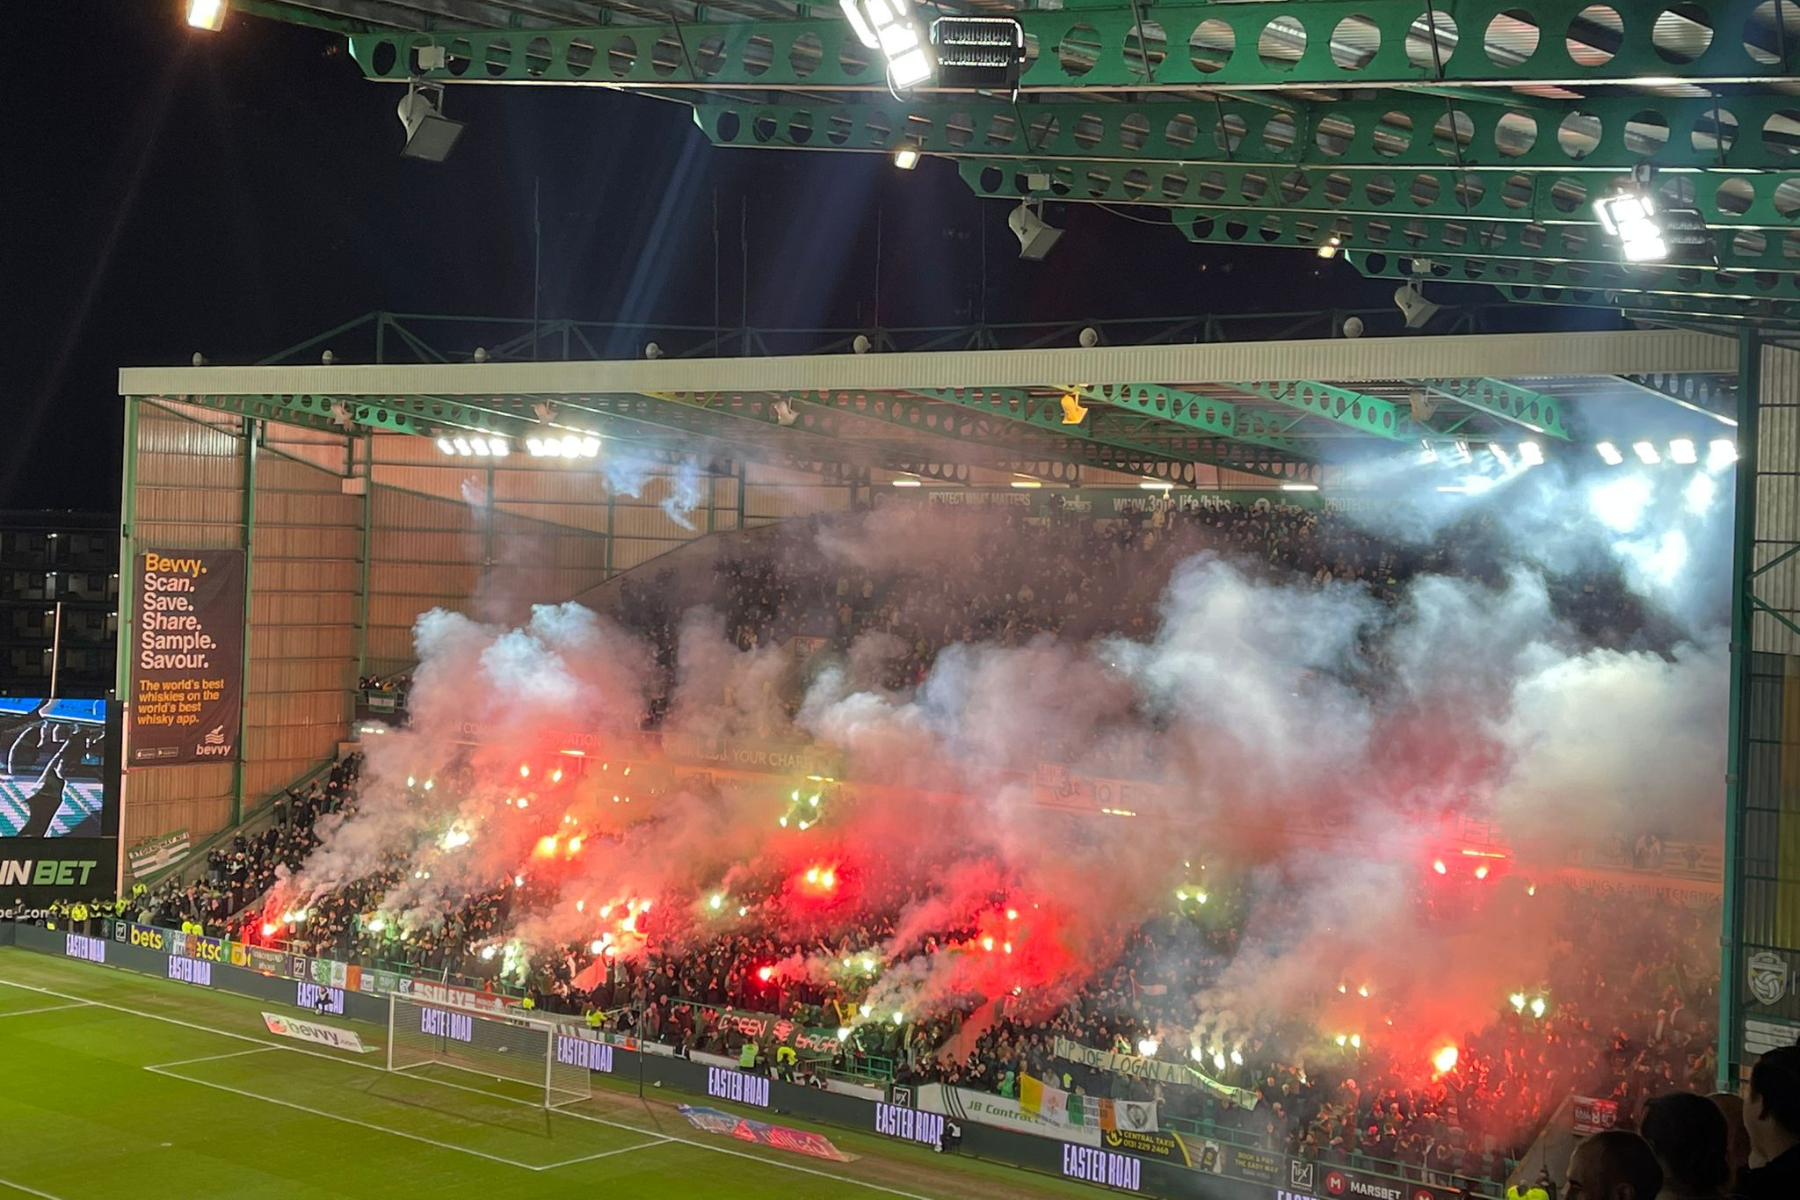 Celtic supporters in huge pyro display ahead of Hibs match